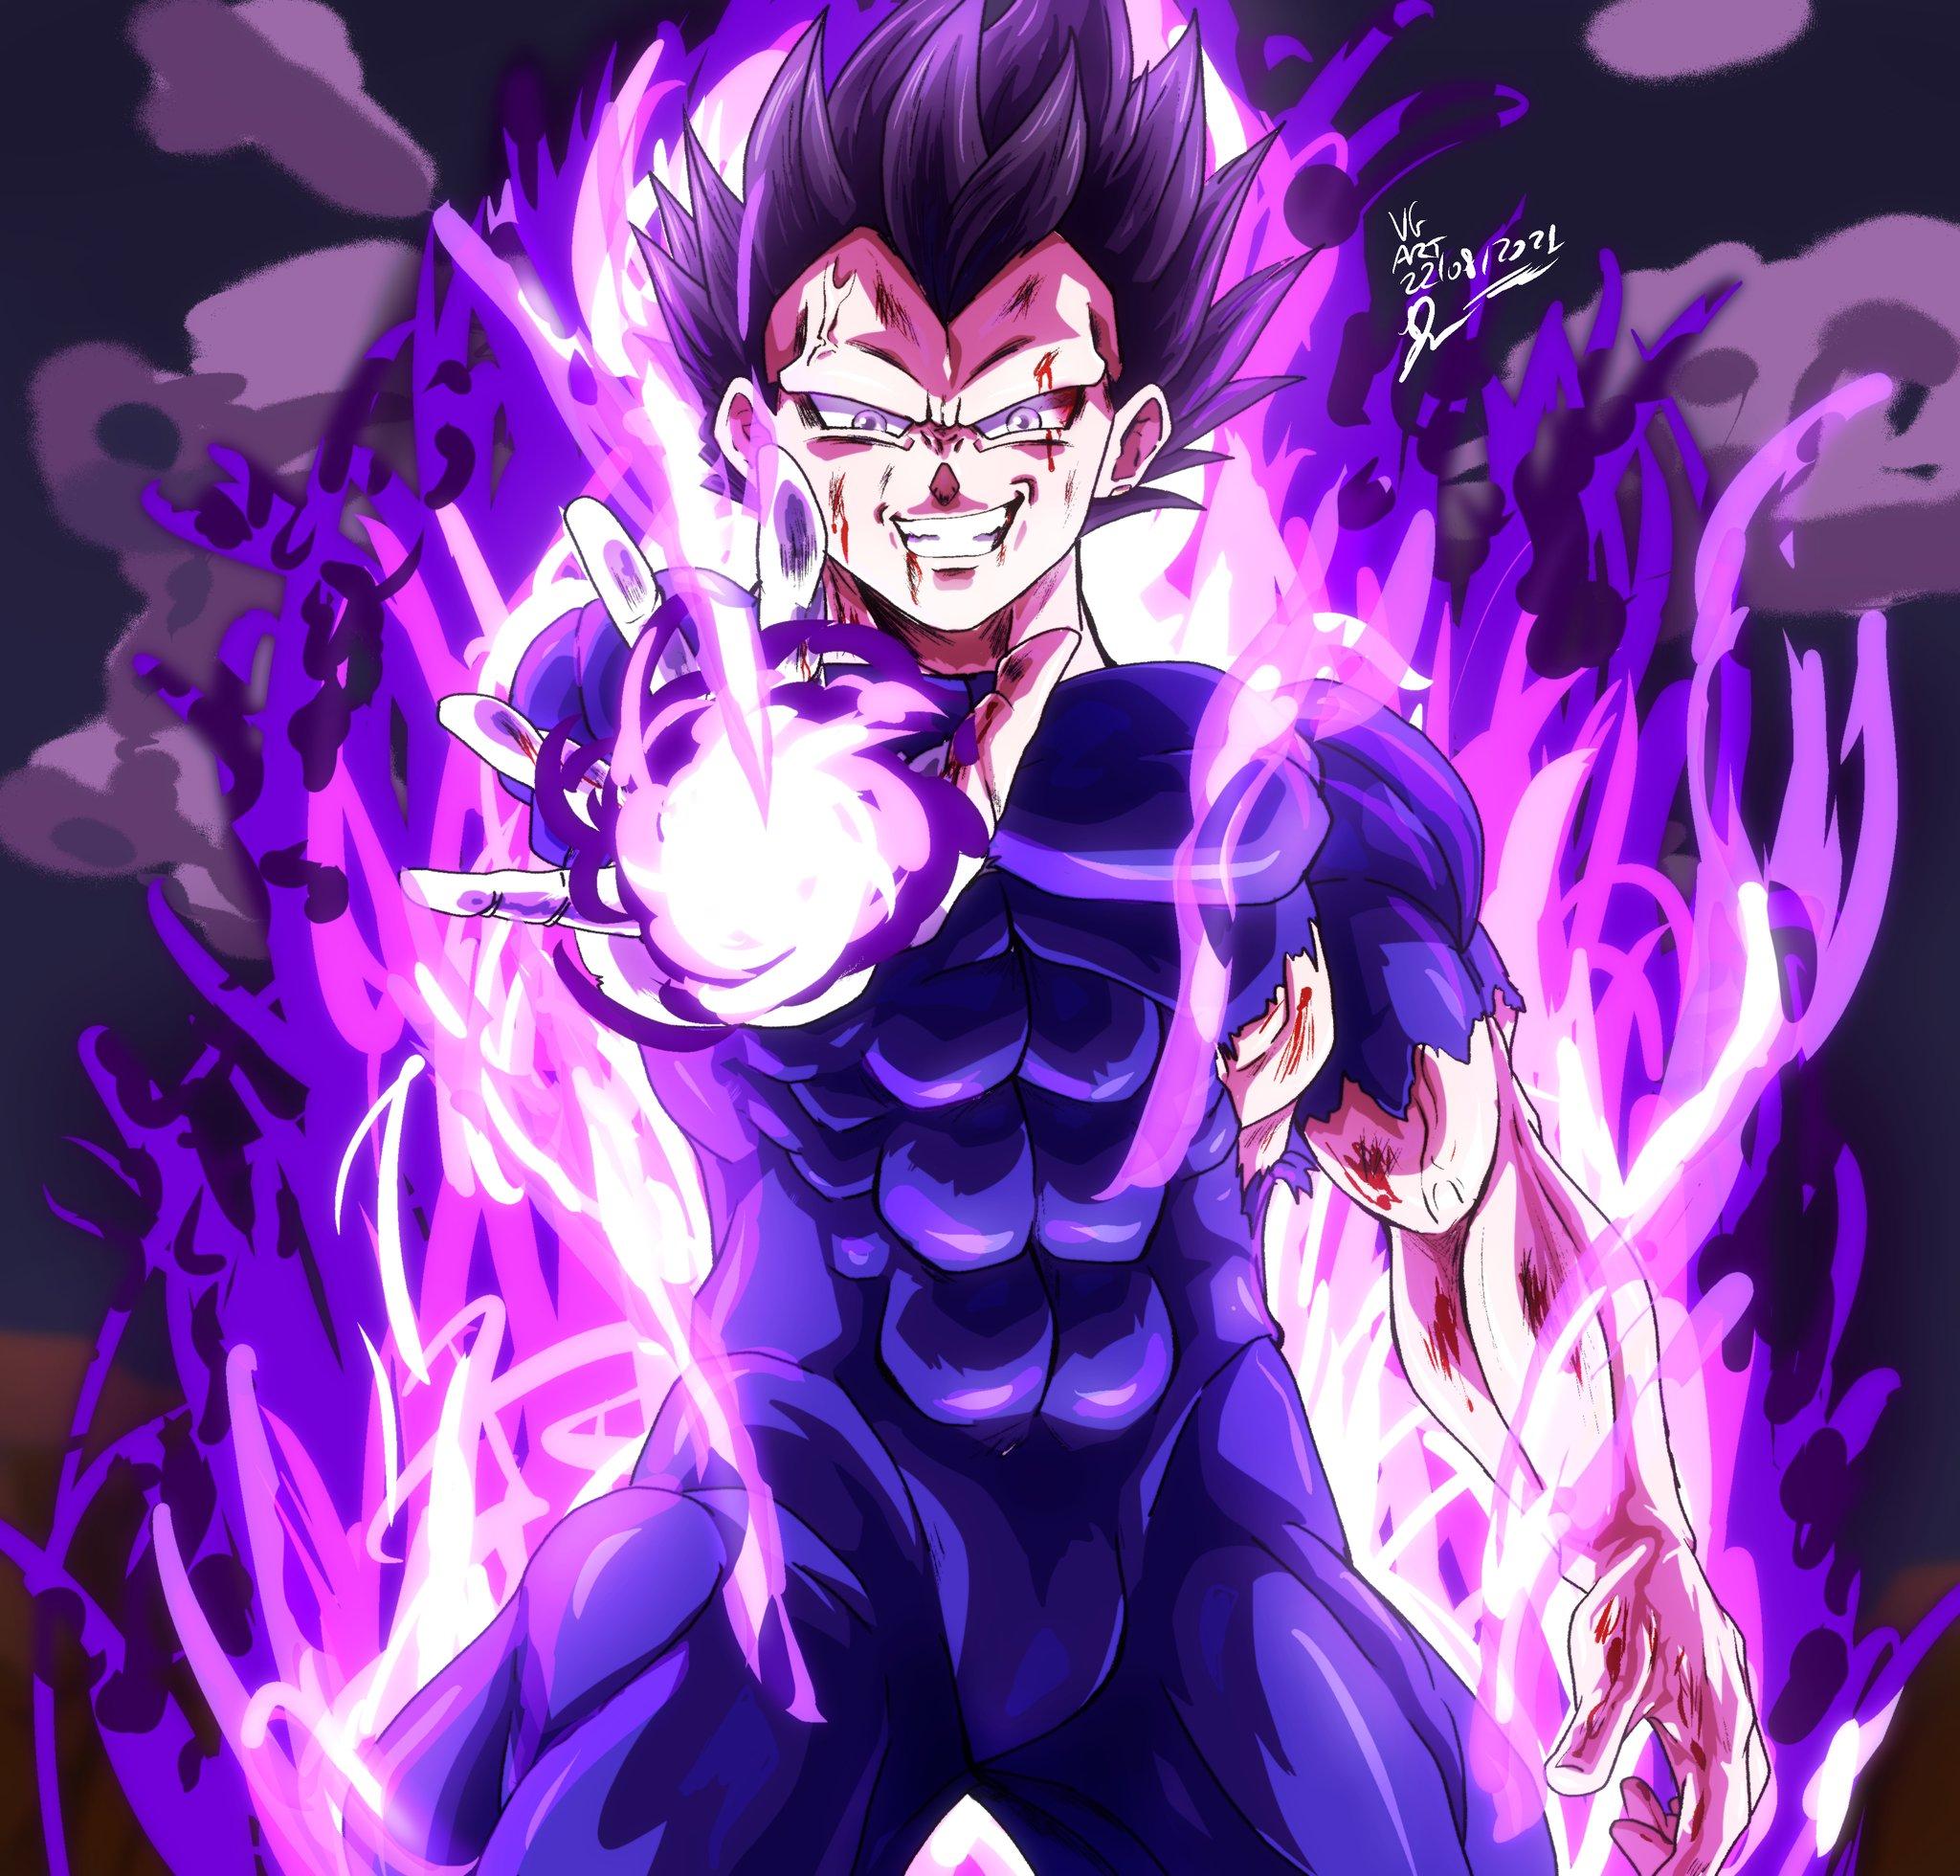 KENJI RIPGachaTalks on X Ultra Ego Vegeta Wallpaper Art credit Toyotaru  I had to make one ever since I seen that amazing illustration from the goat  Toyotaru  amp  Are appreciated 